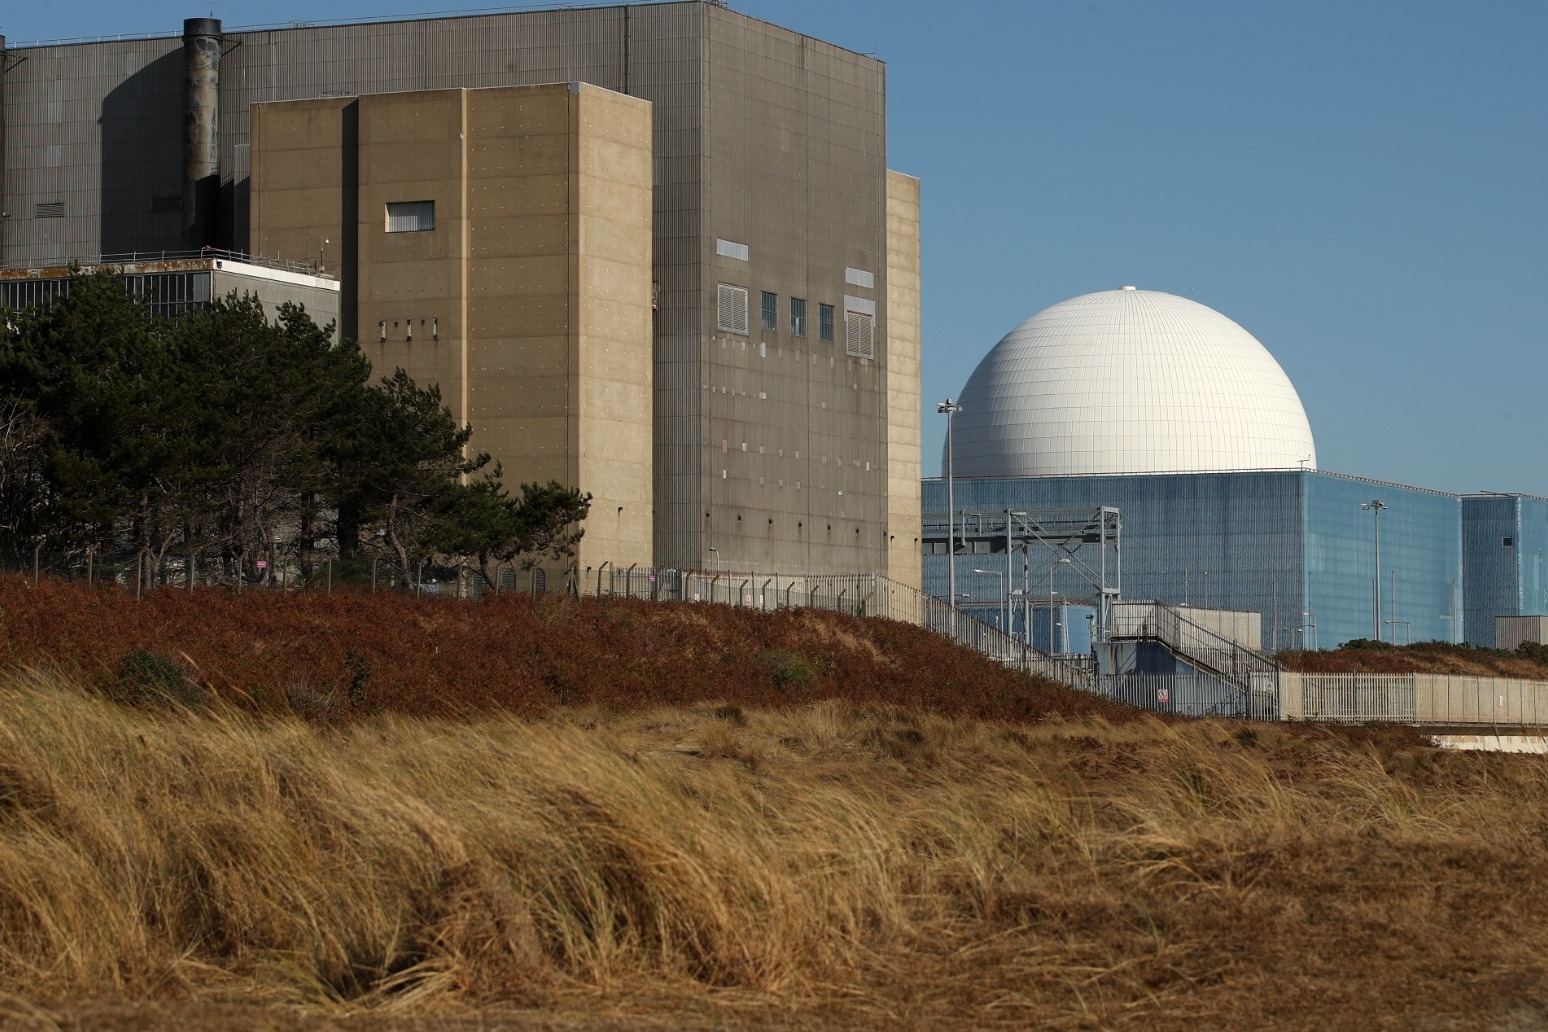 Sizewell C nuclear power plant ‘under review’ 